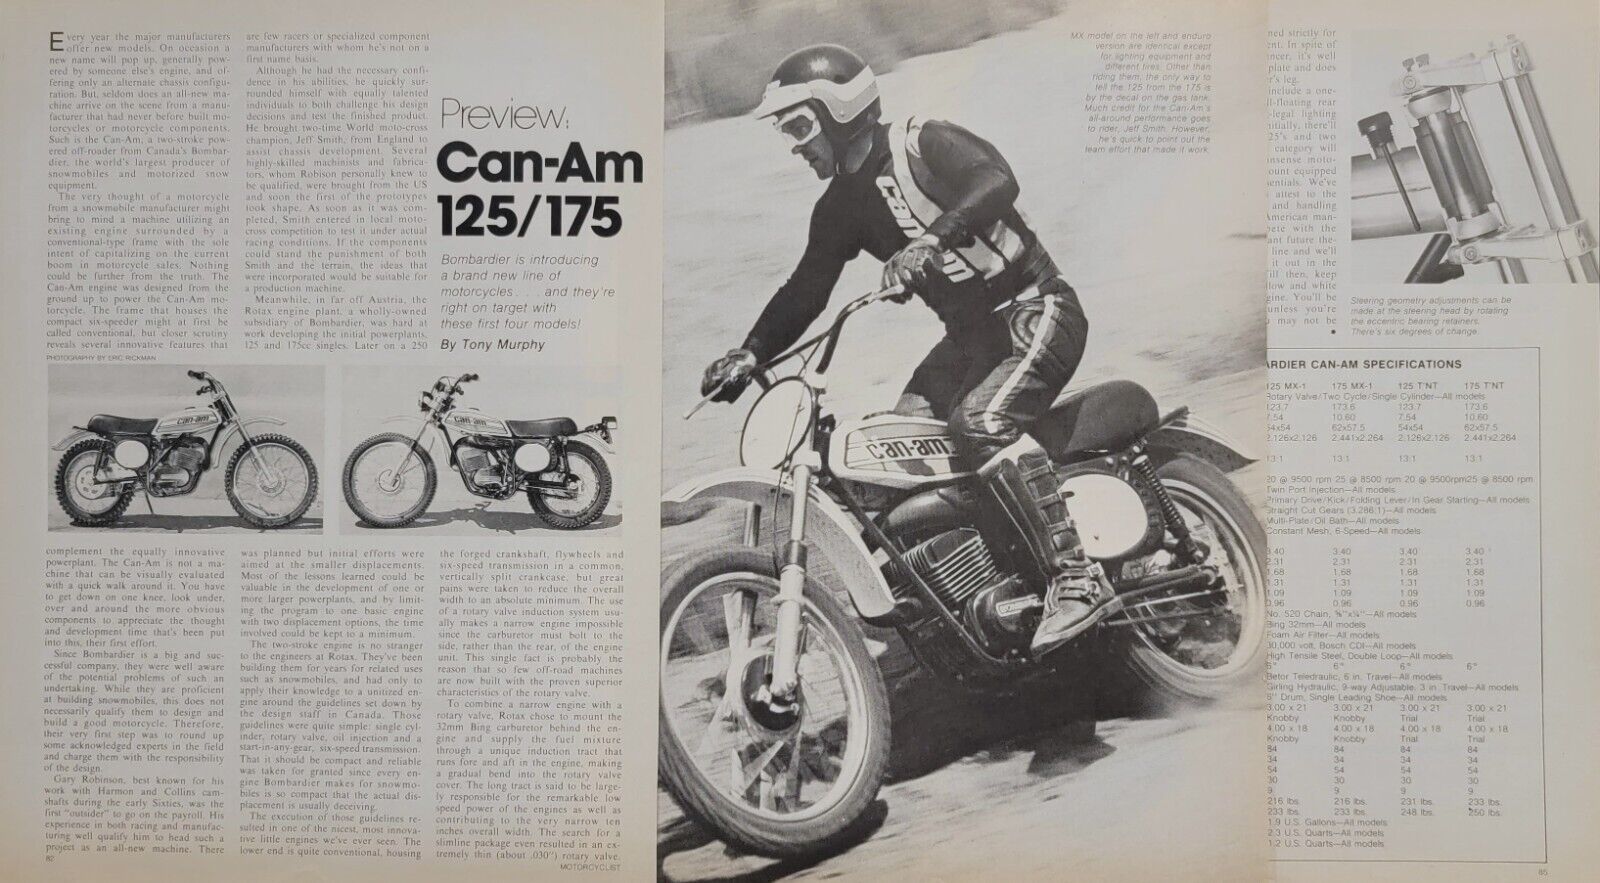 1974 Can Am 125 175 Preview with specs 4p Motorcycle Article